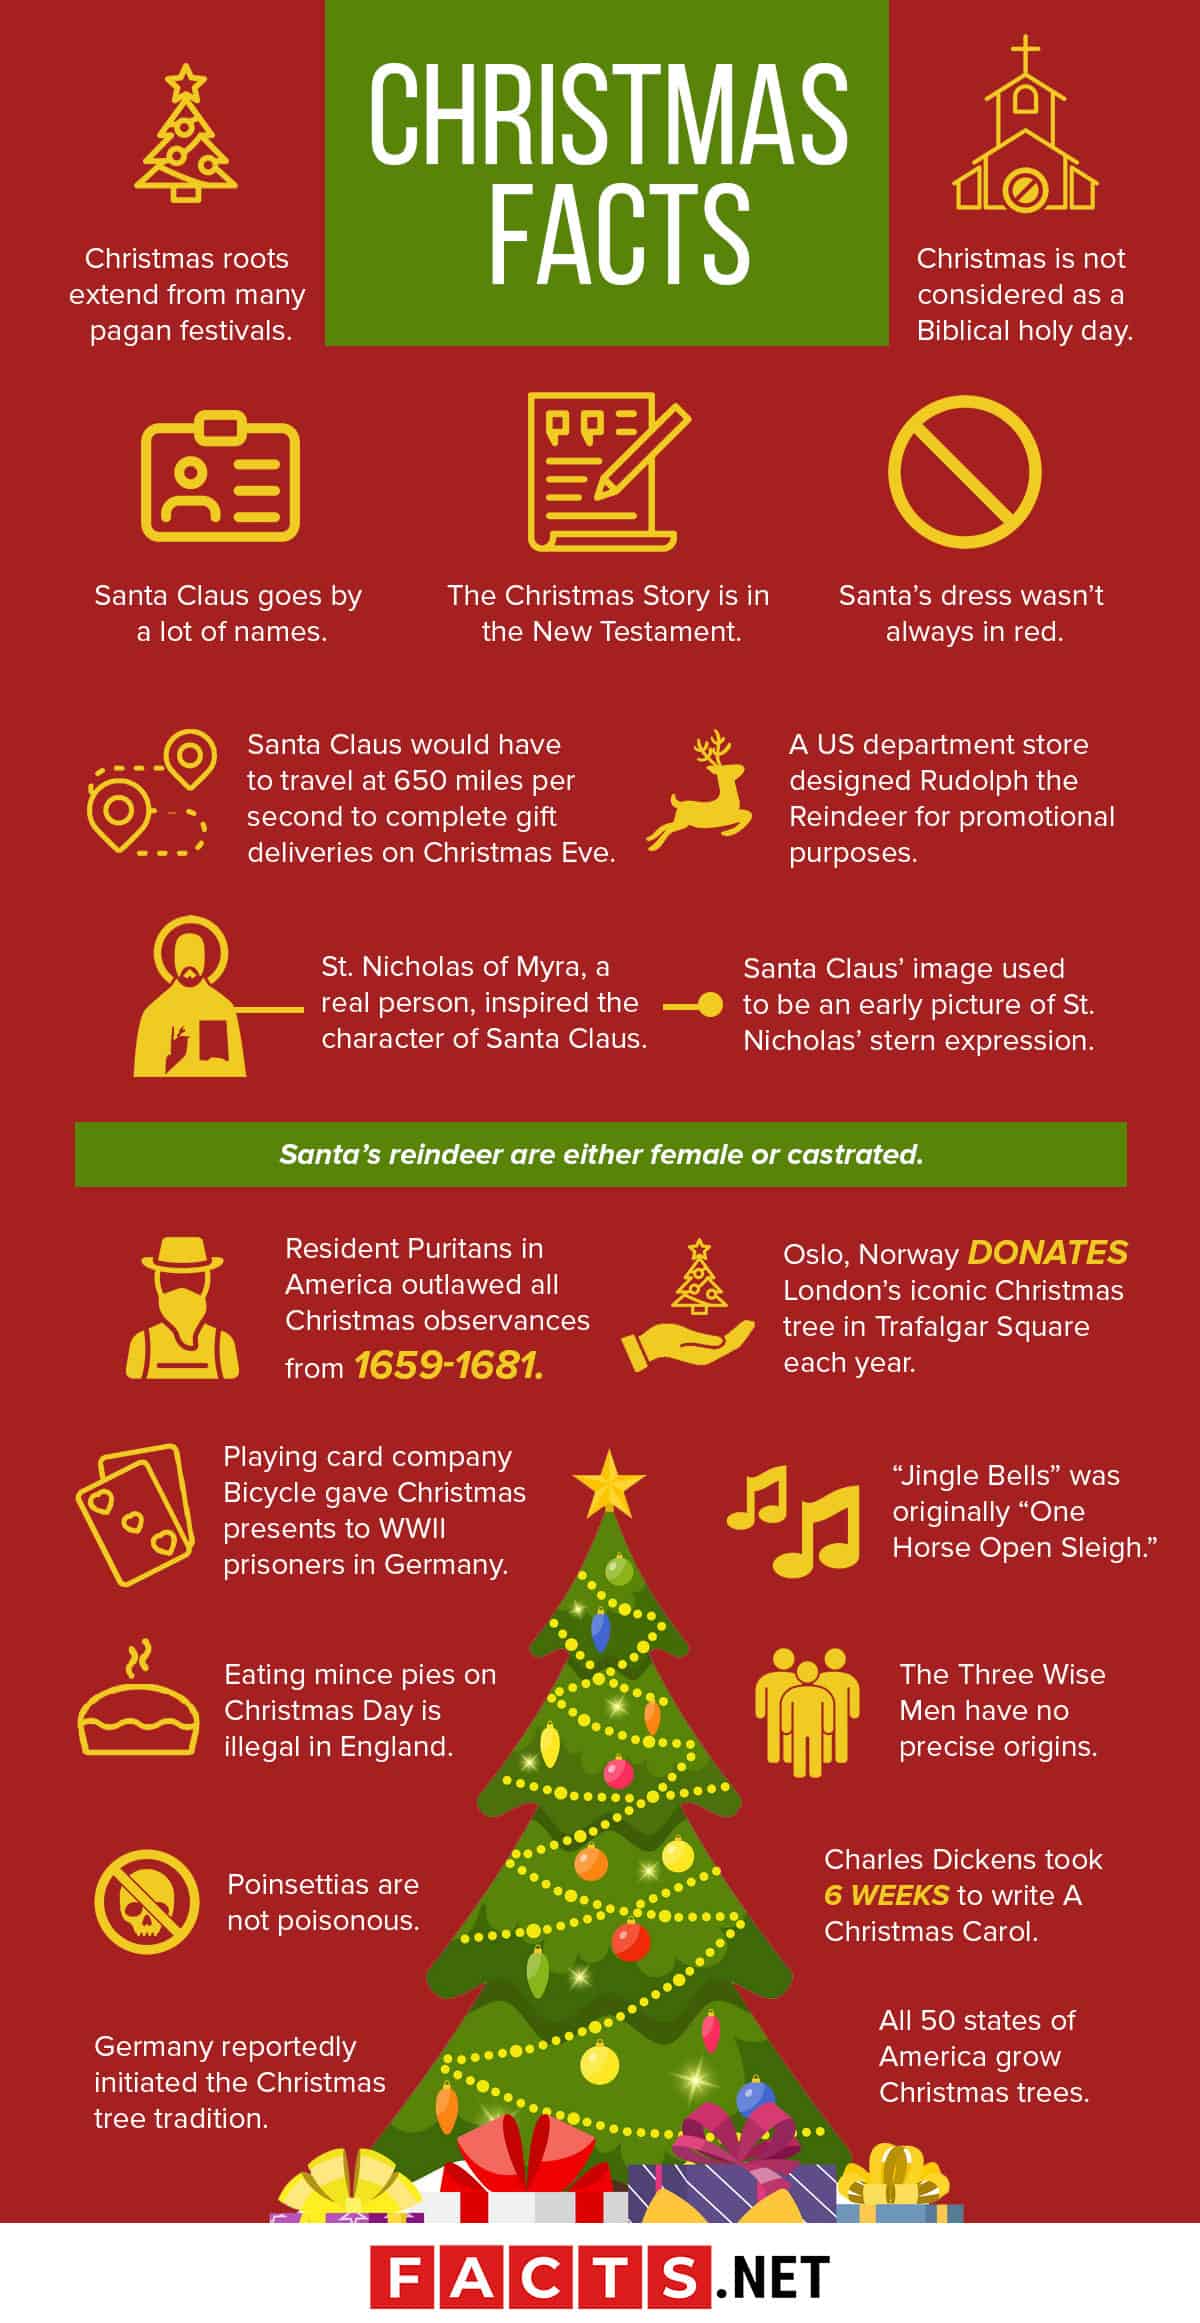 100 Festive Facts About Christmas You (Definitely) Want To Know  Facts.net